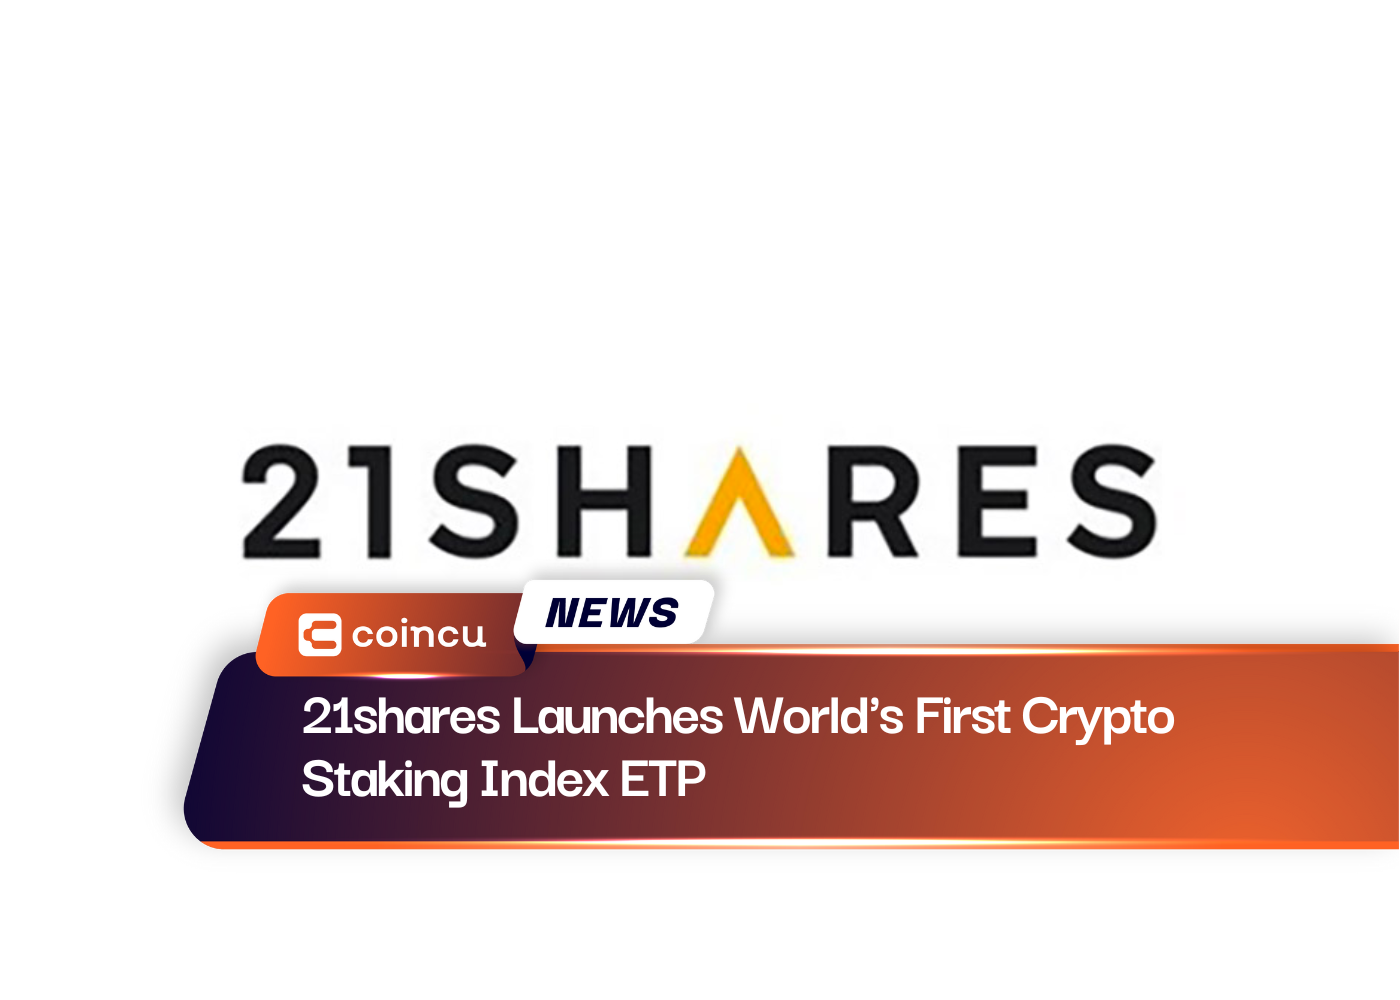 21shares Launches World's First Crypto Staking Index ETP